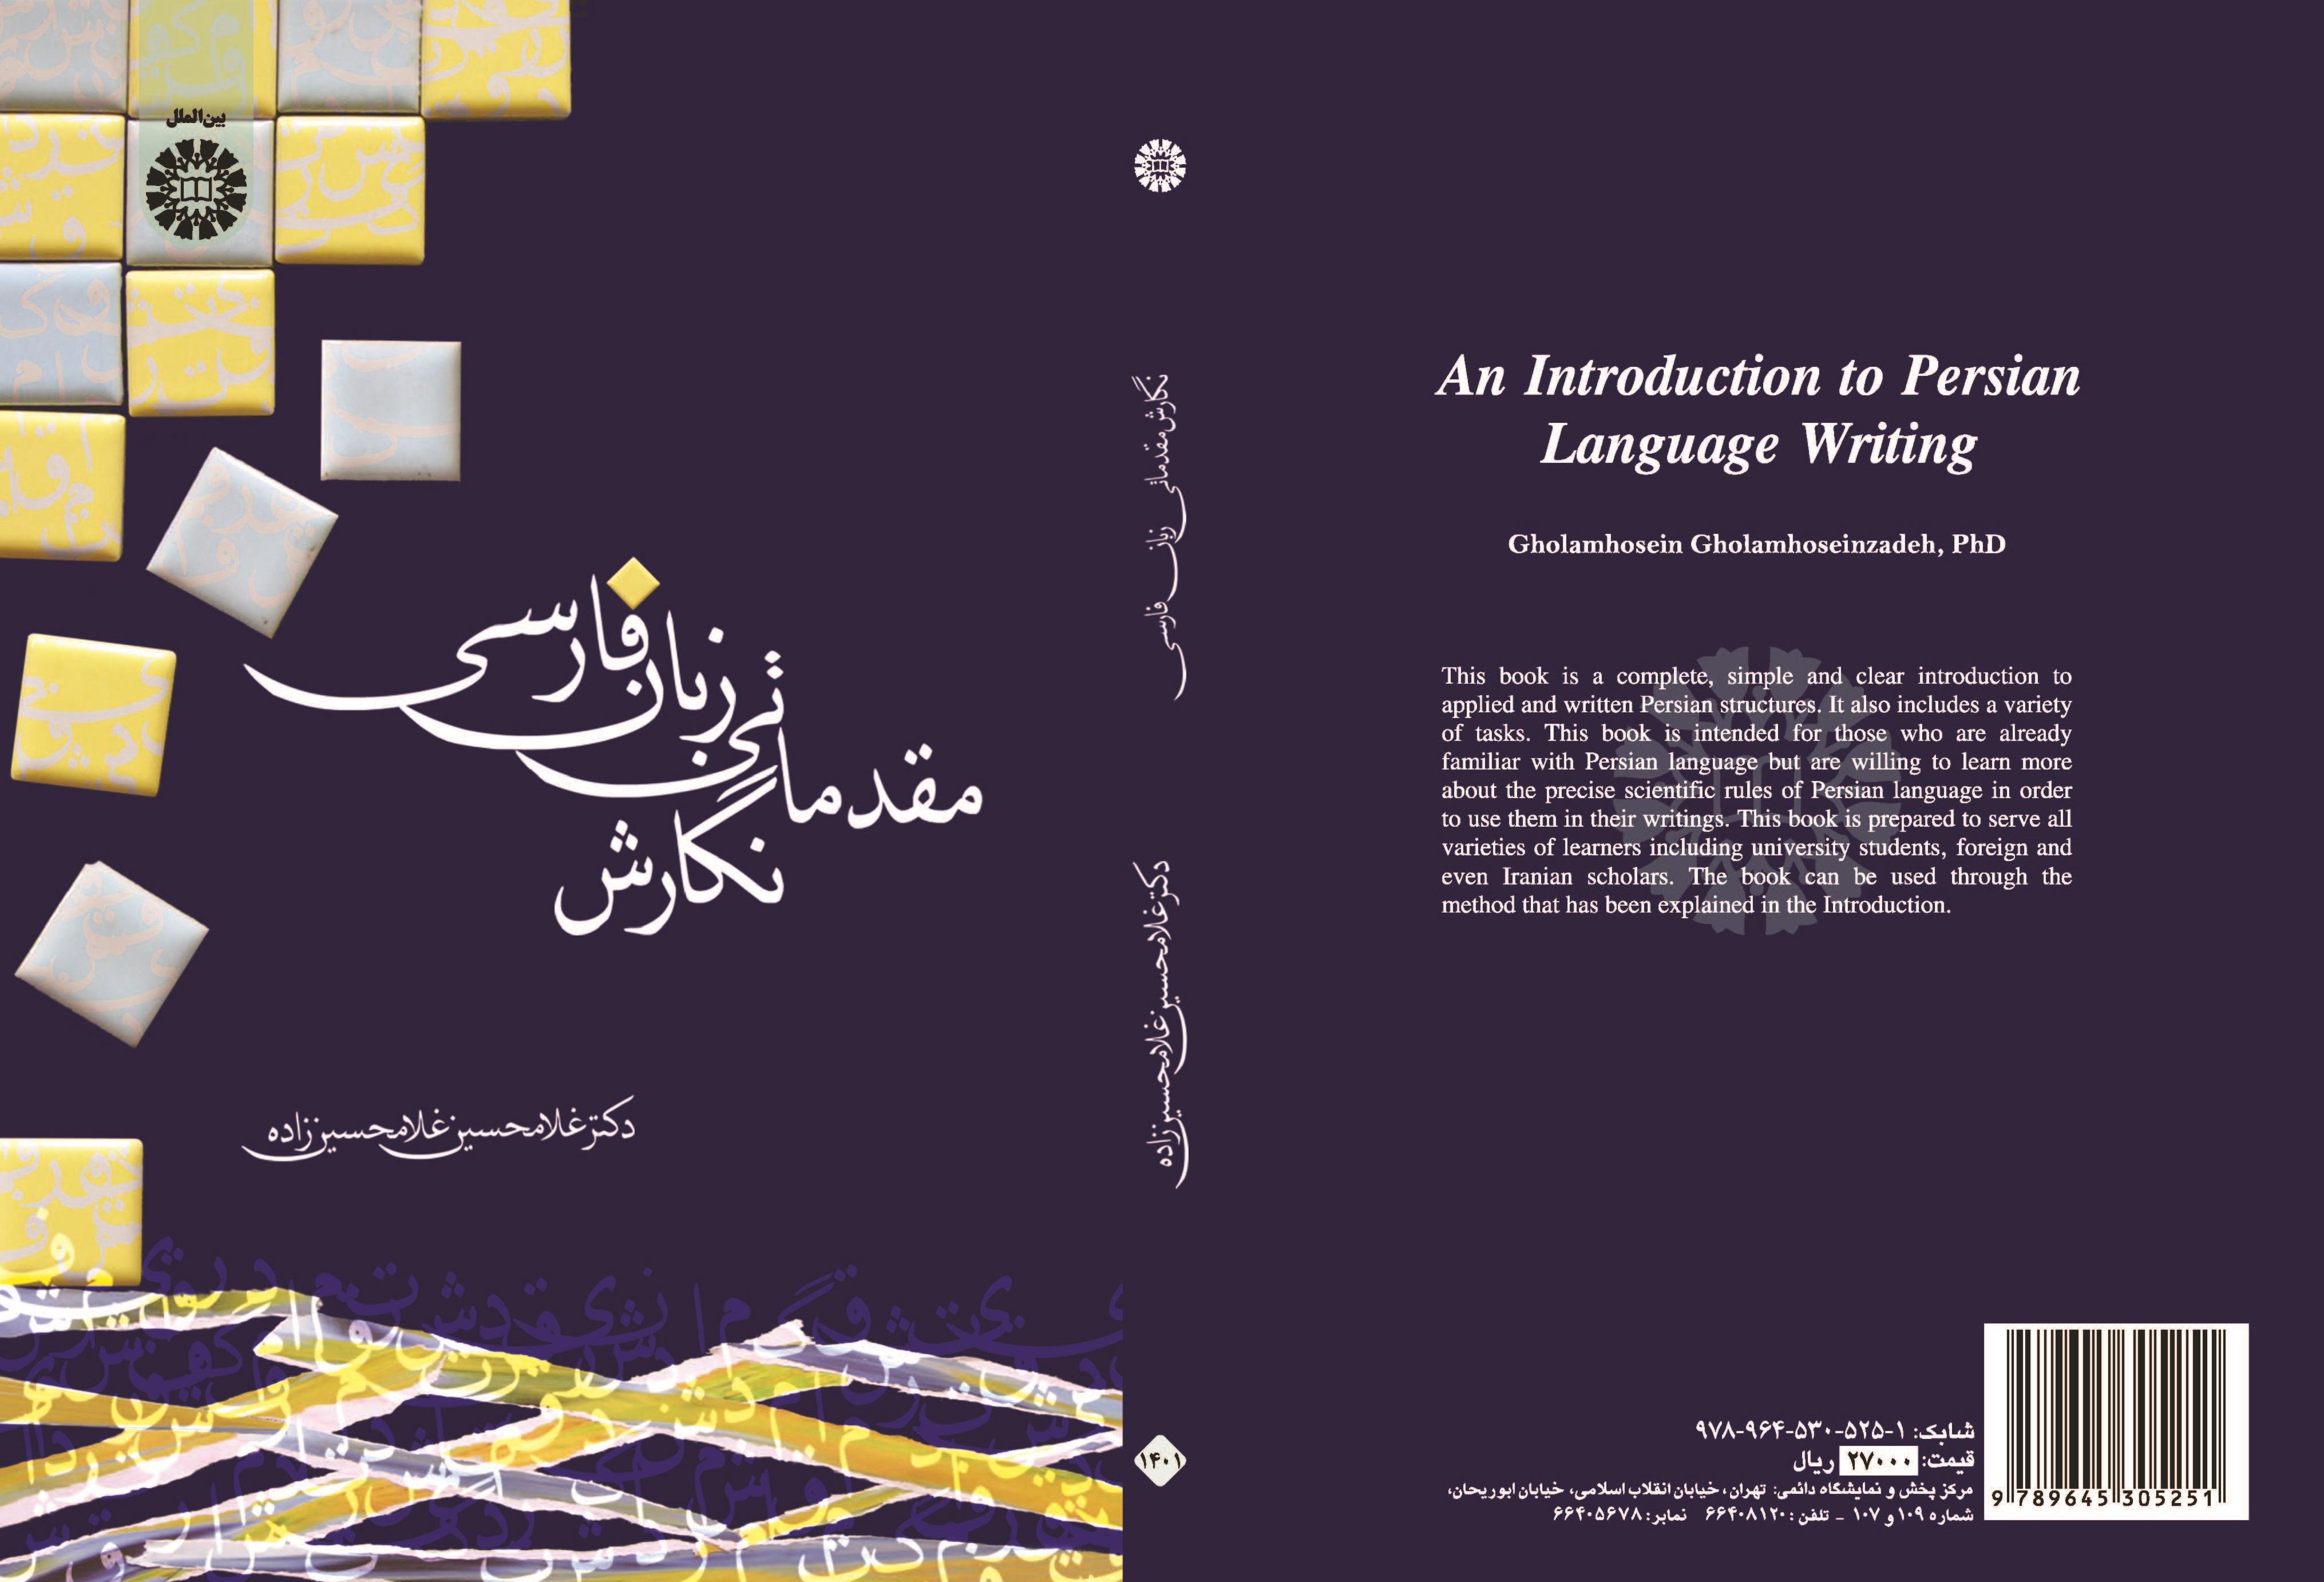 An Introduction to Persian Language Writing